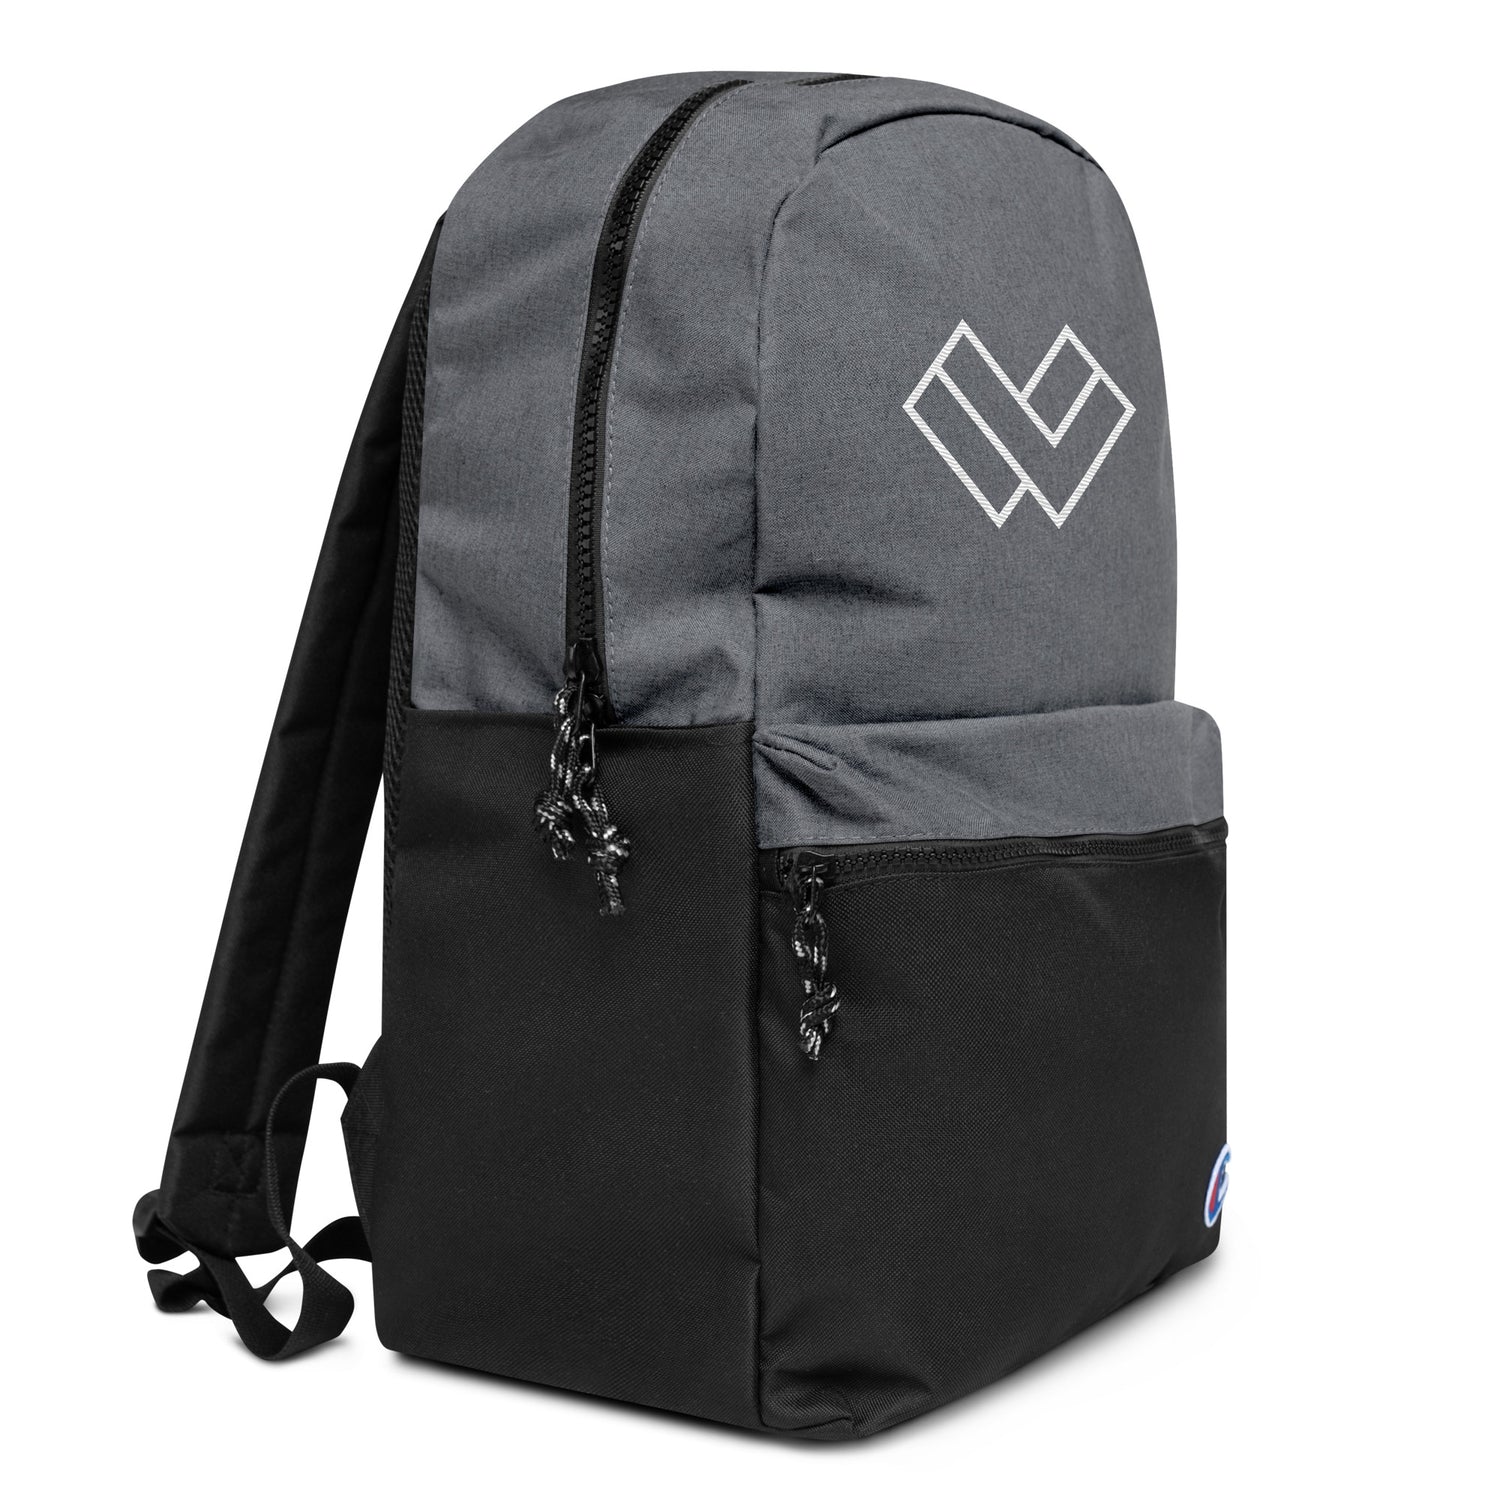 Cradle Lacrosse Backpack by Champion Grey Black Right Front